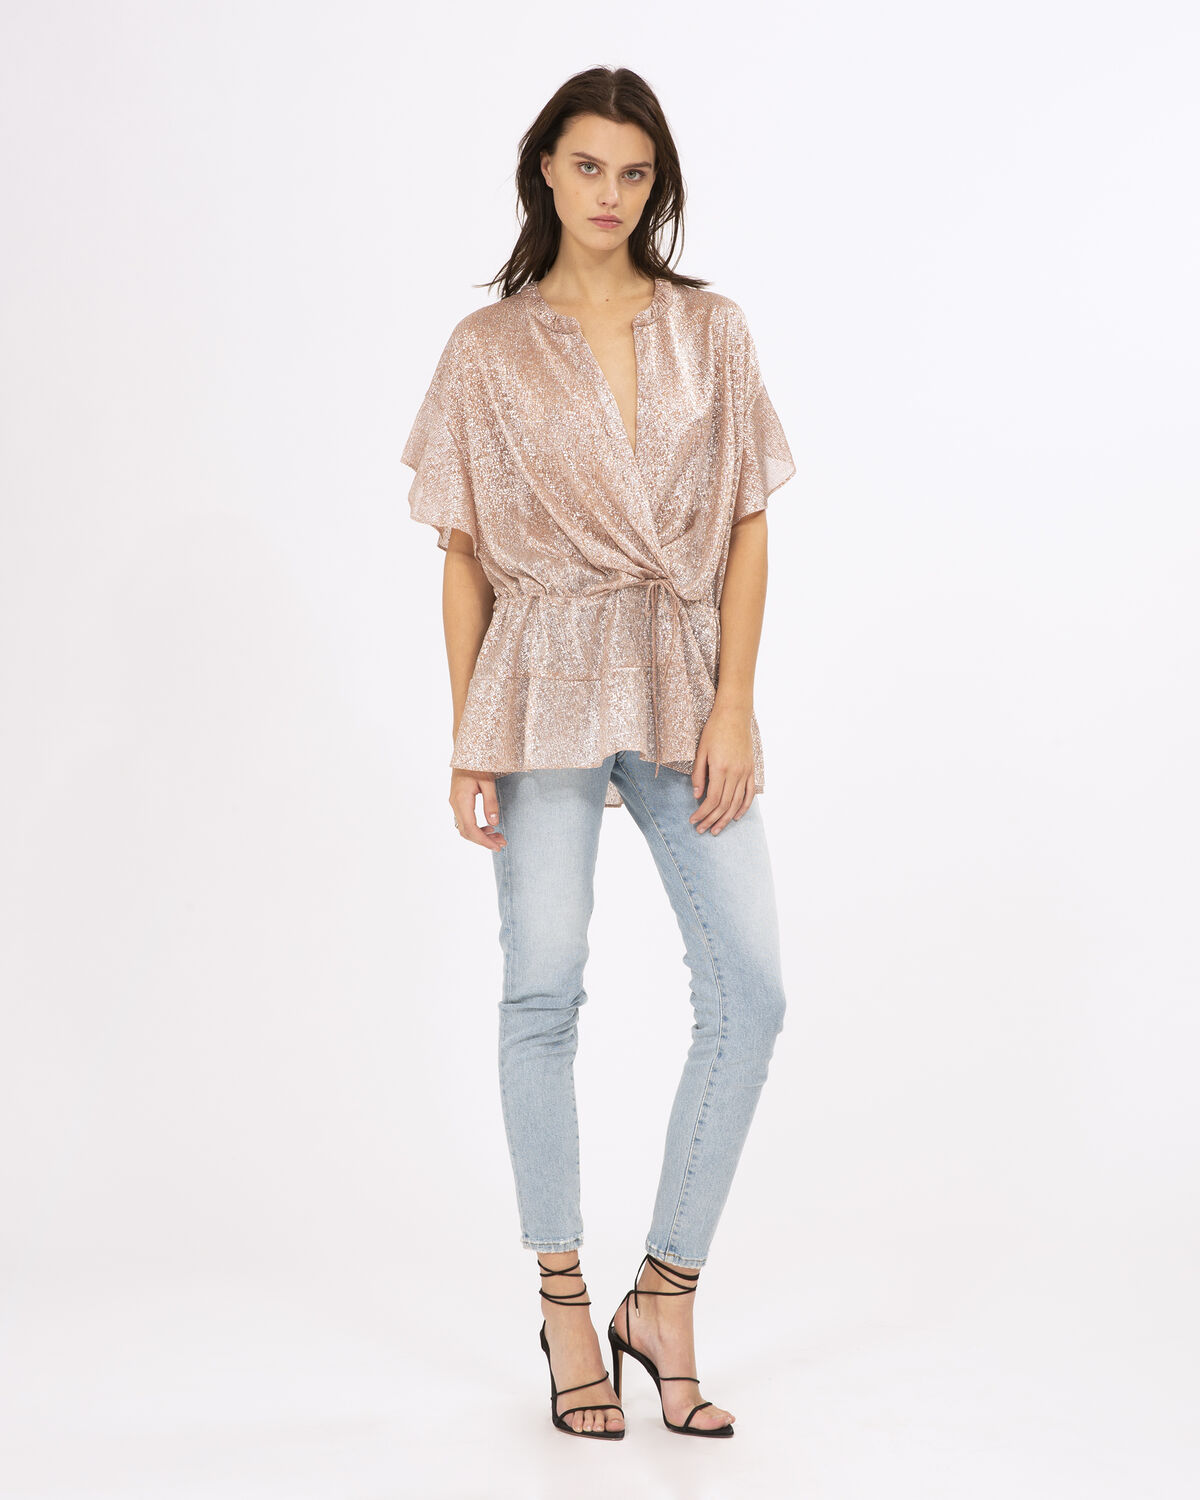 Photo of IRO Paris Panoramic Top Pink - This Top Is Distinguished By Its Short Flounced Sleeves, Deep Crossed V-neck And Brilliant Lurex Effect Details. With Its Marked Waist, It Will Bring A Feminine Touch To All Your Looks. Shirts-Tops